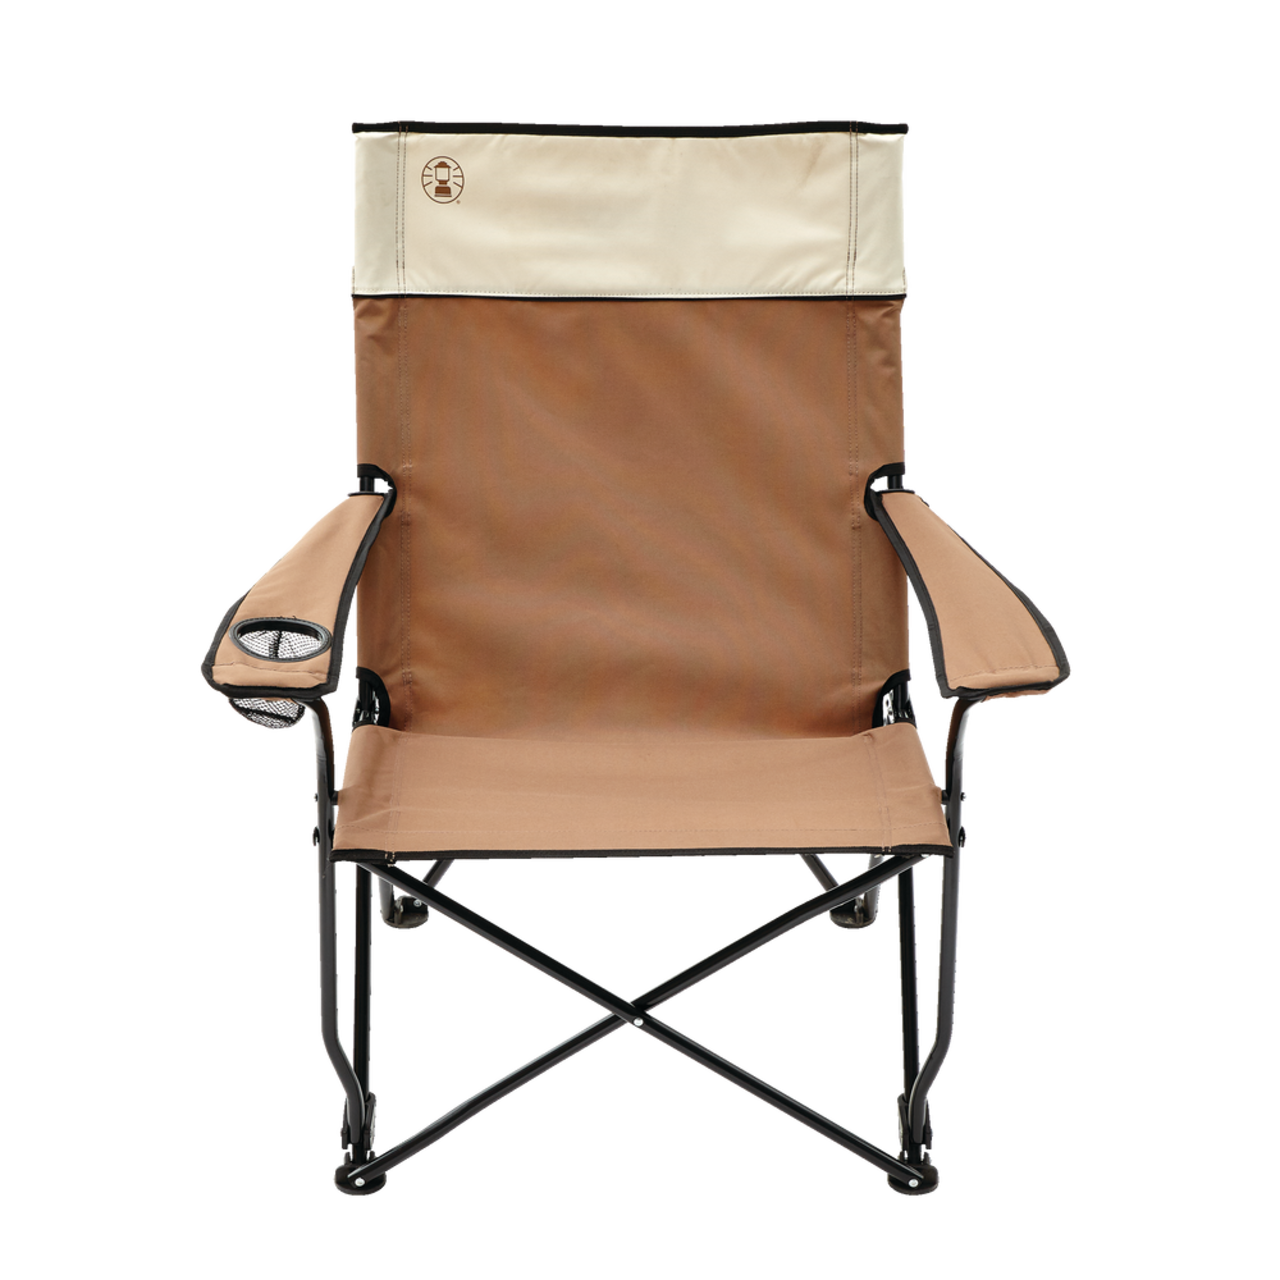 https://media-www.canadiantire.ca/product/playing/camping/camping-furniture/0762183/coleman-steel-sling-chair-722941b7-d49c-4f20-b324-9988d6d1253c.png?imdensity=1&imwidth=1244&impolicy=mZoom